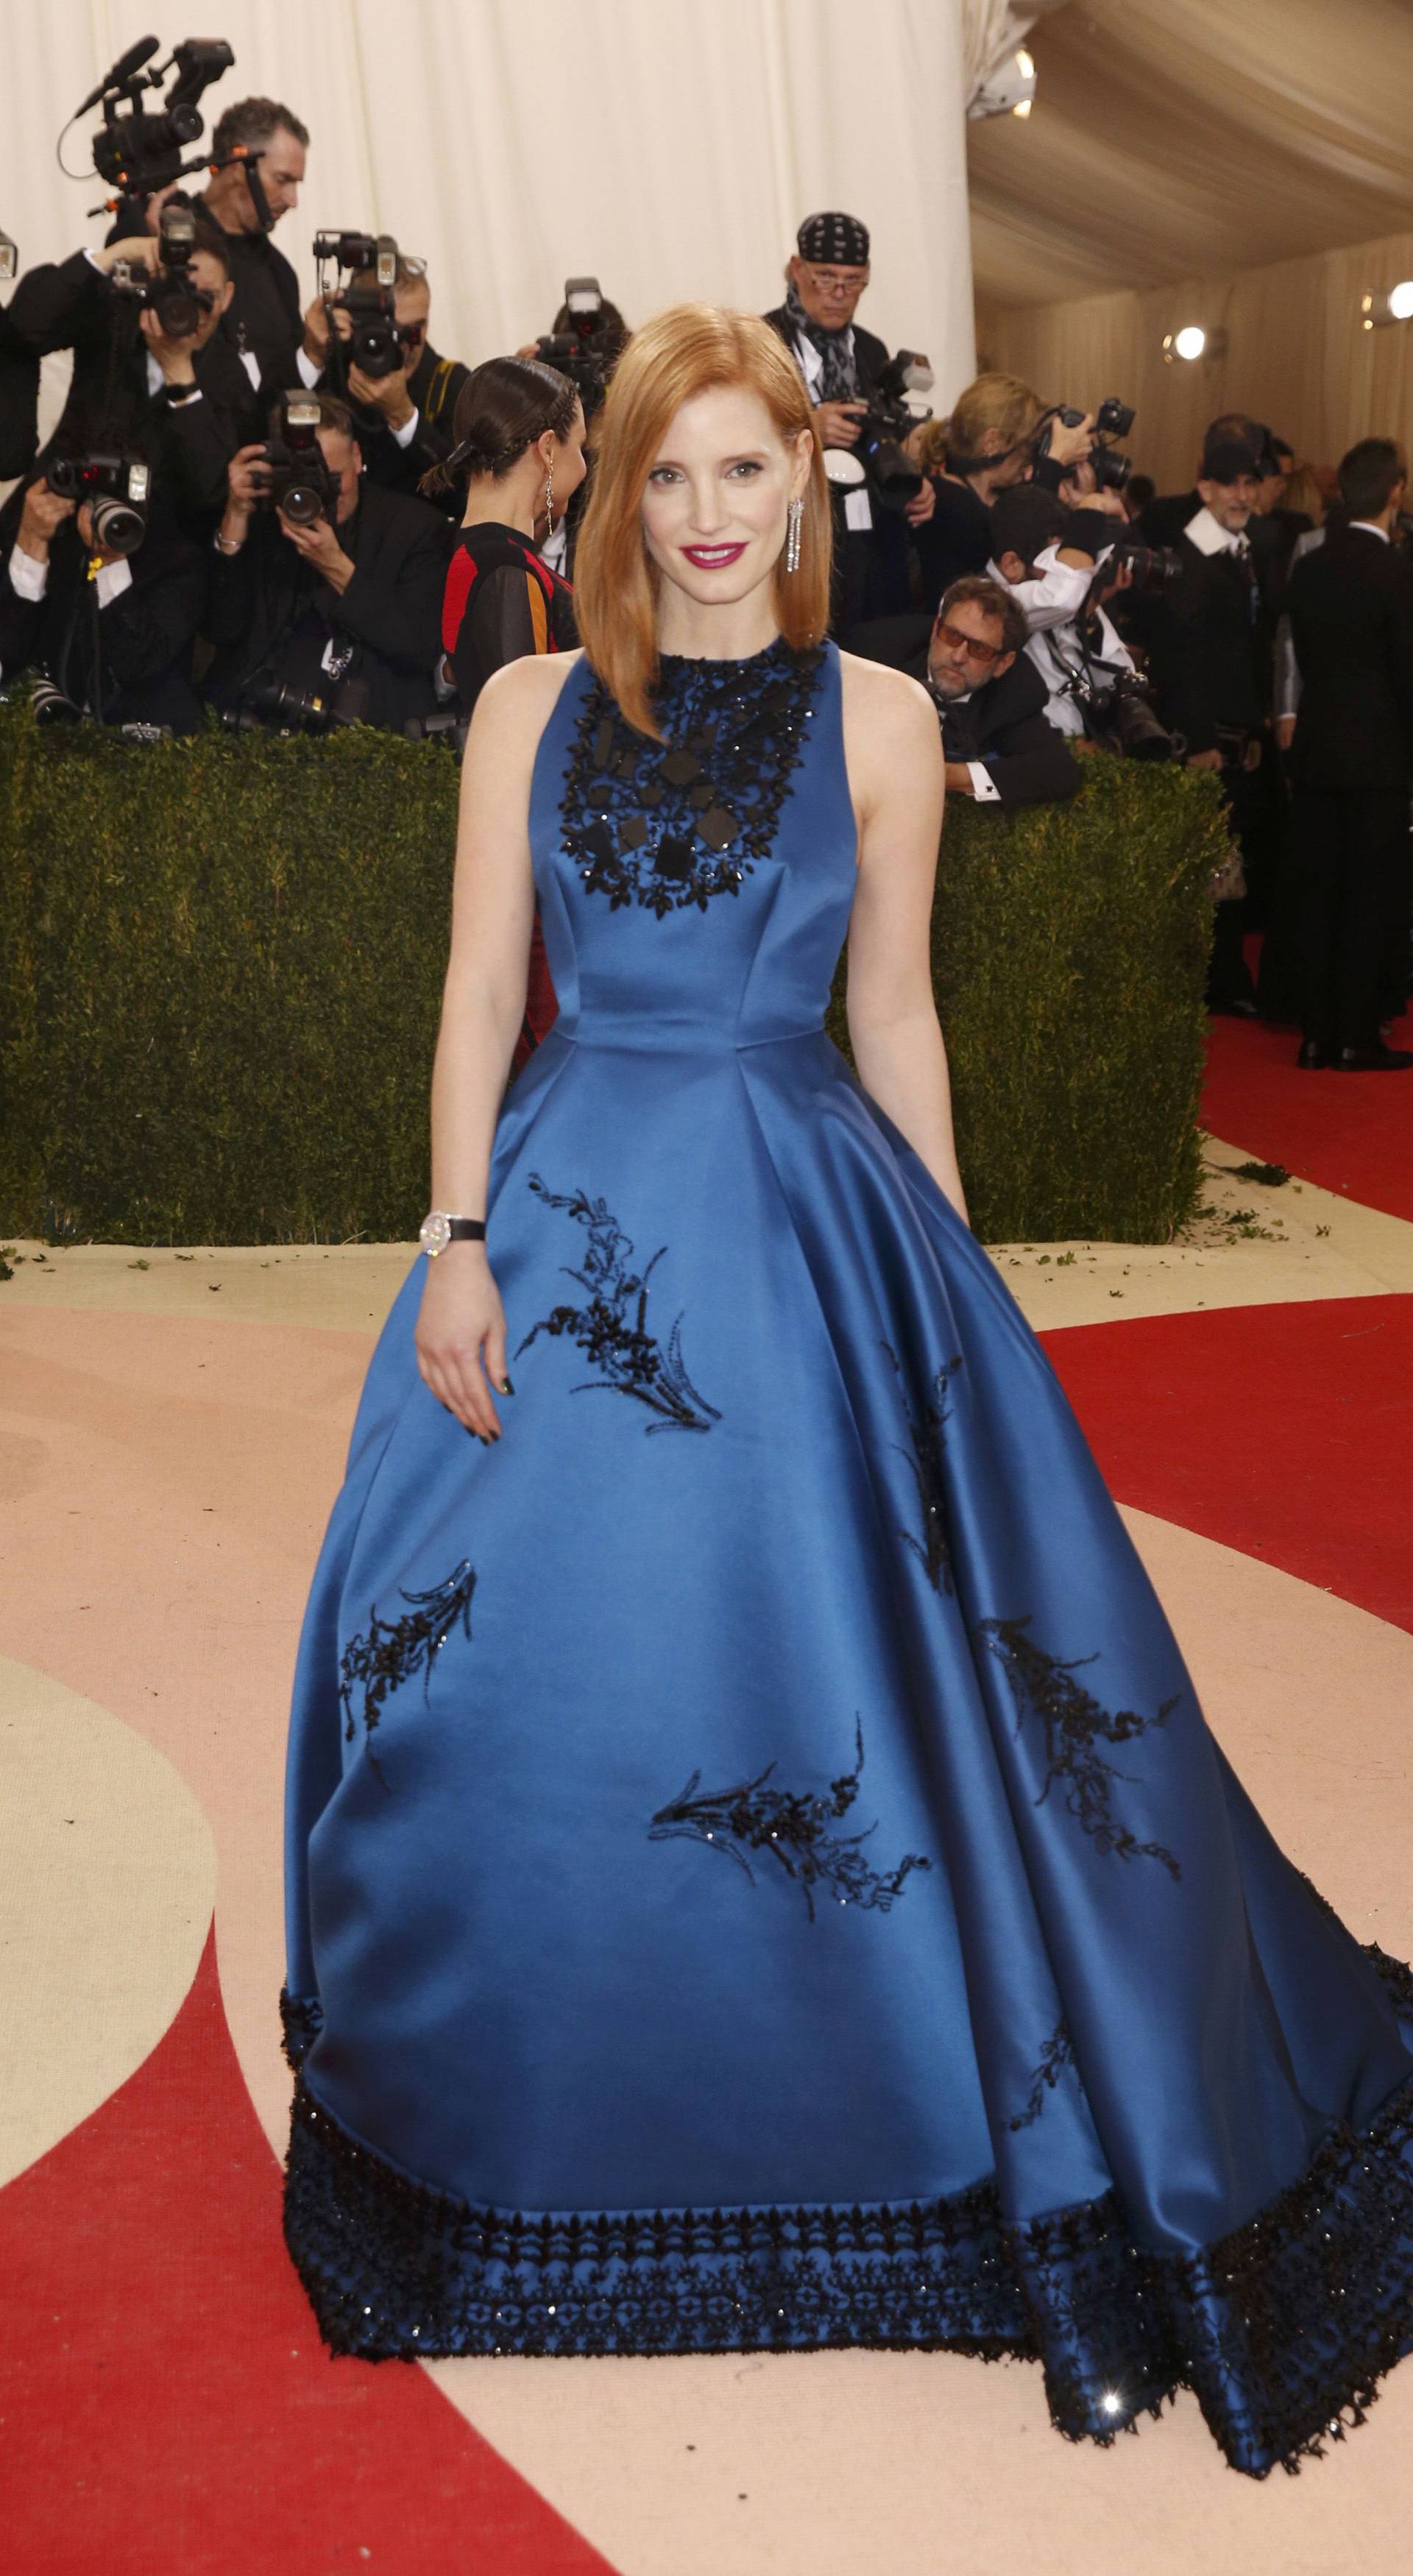 Actress Jessica Chastain arrives at the Met Gala in New York